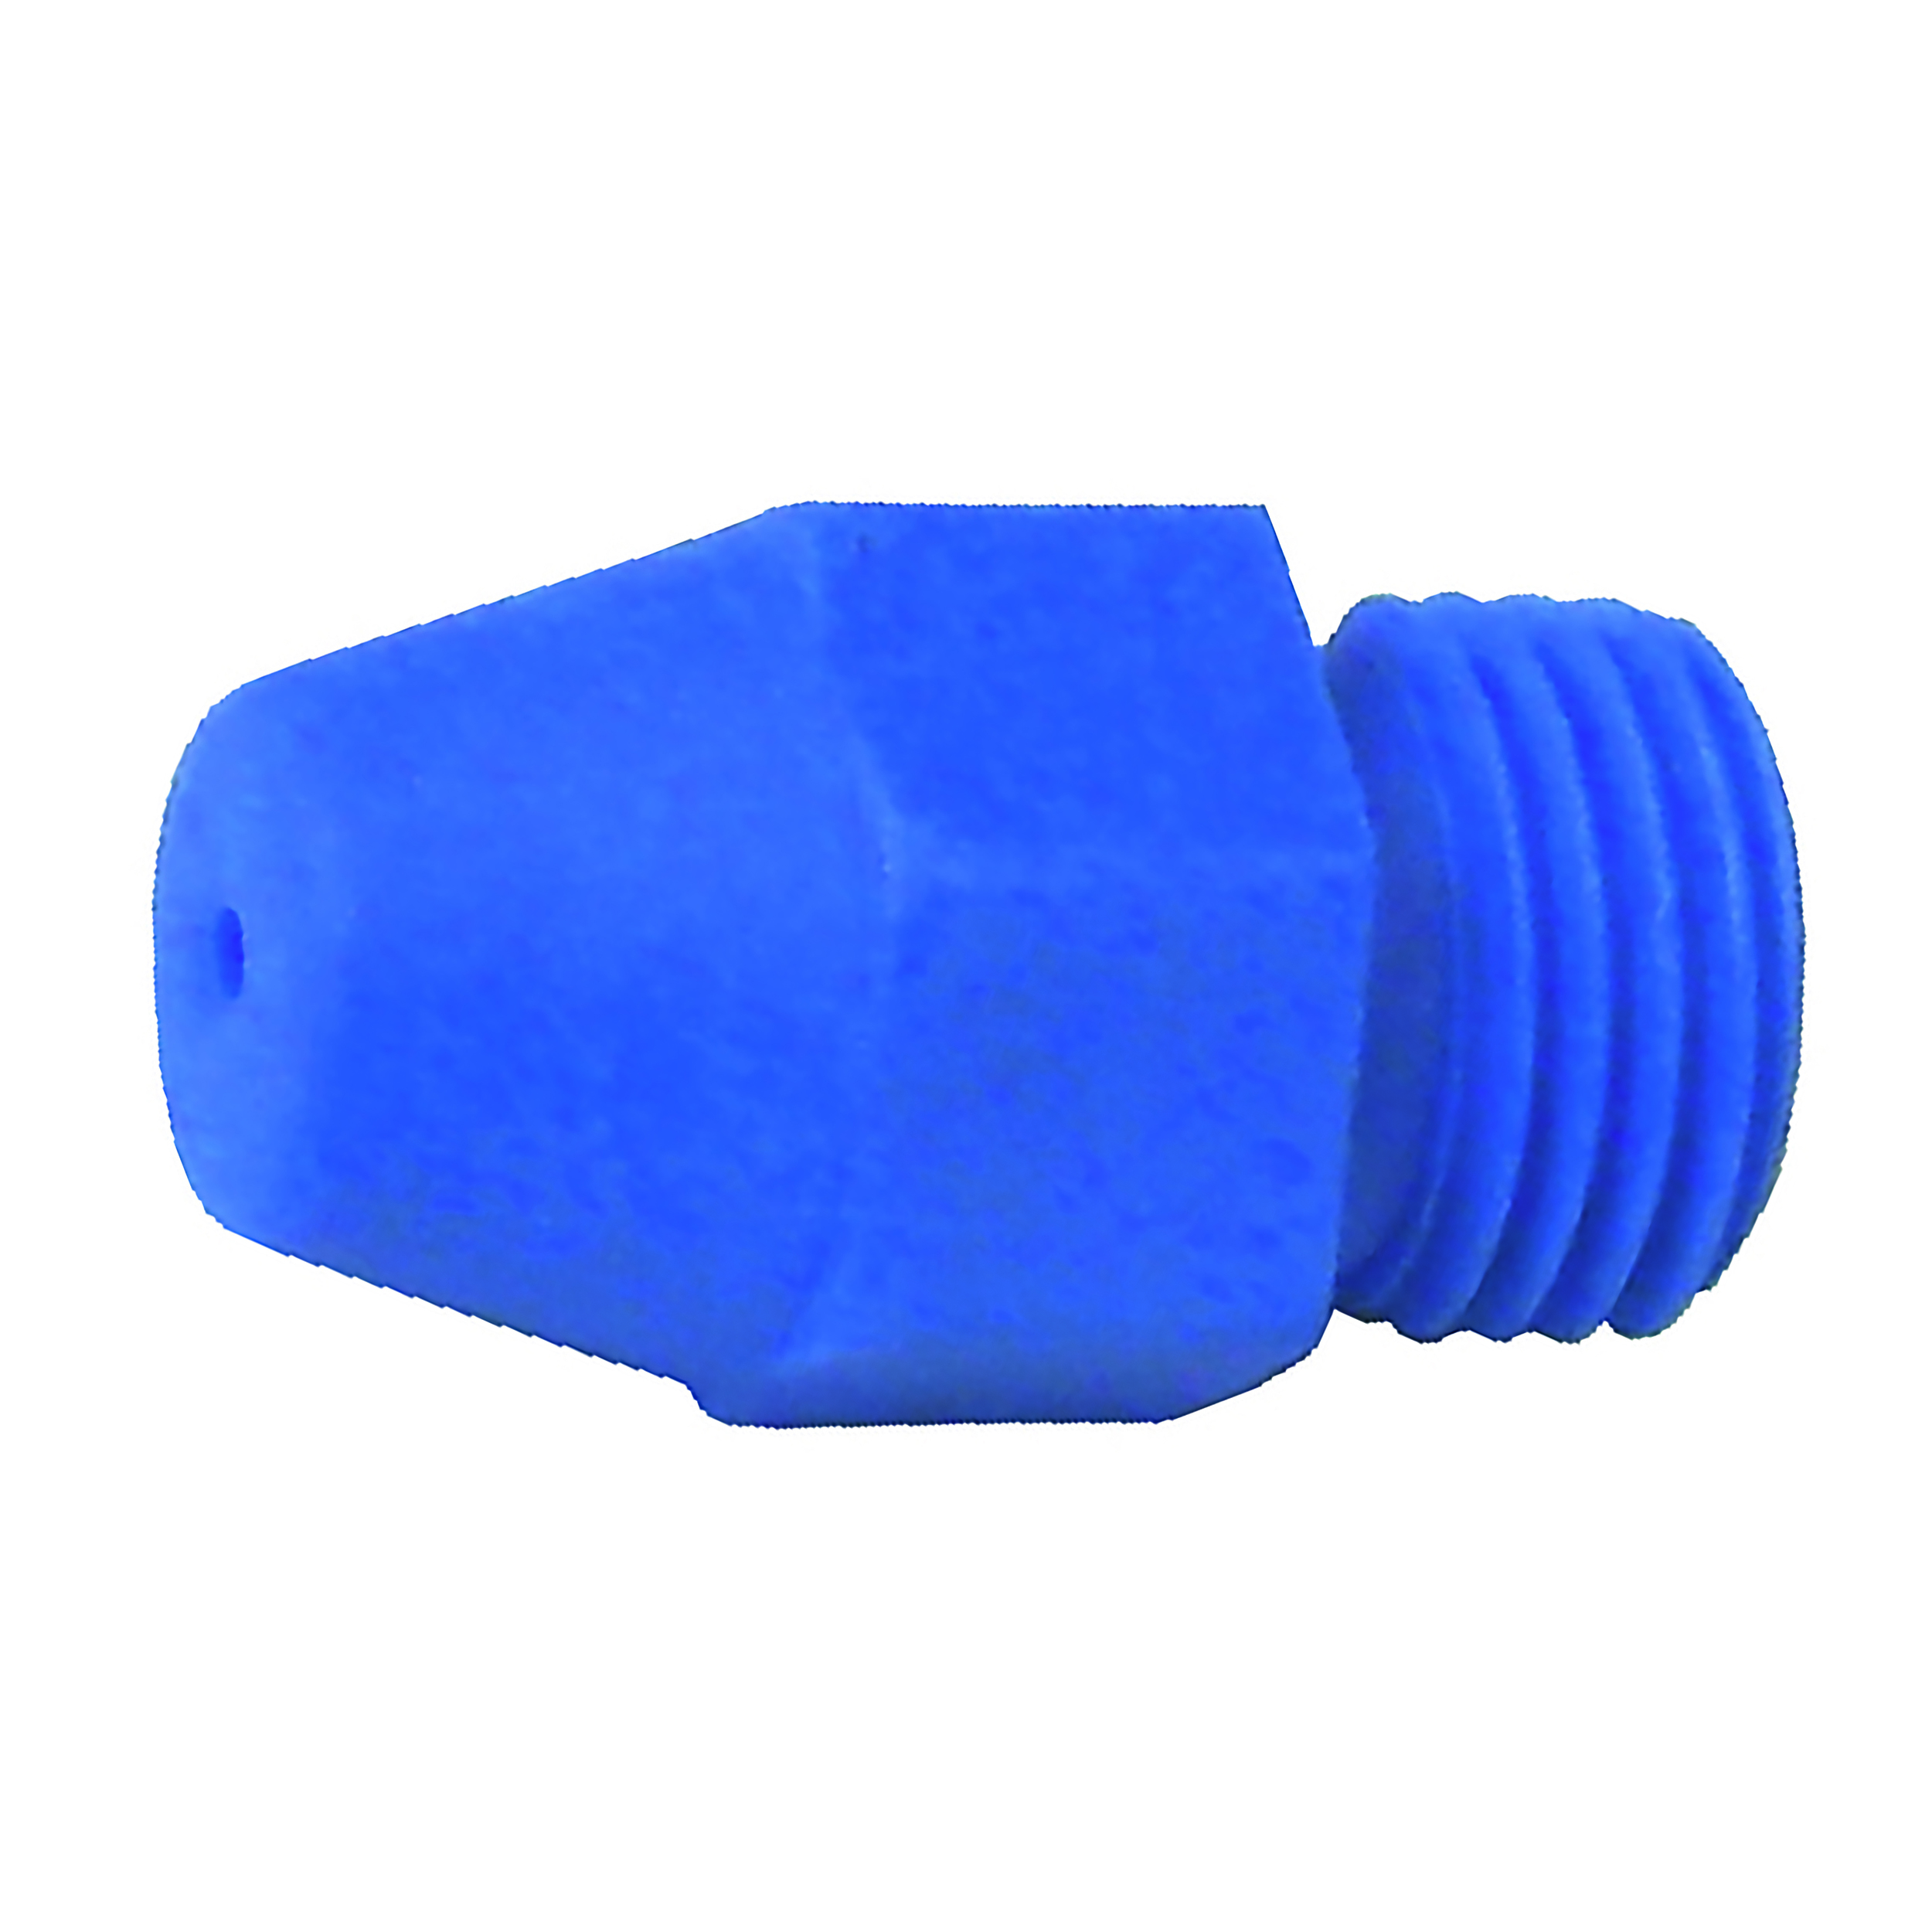 Standard nozzle, plastic, blue, centric hole Ø1.5 mm, connection: M12 × 1.25, more than 90 dB(A) at pressures > 58 psi/4 bar